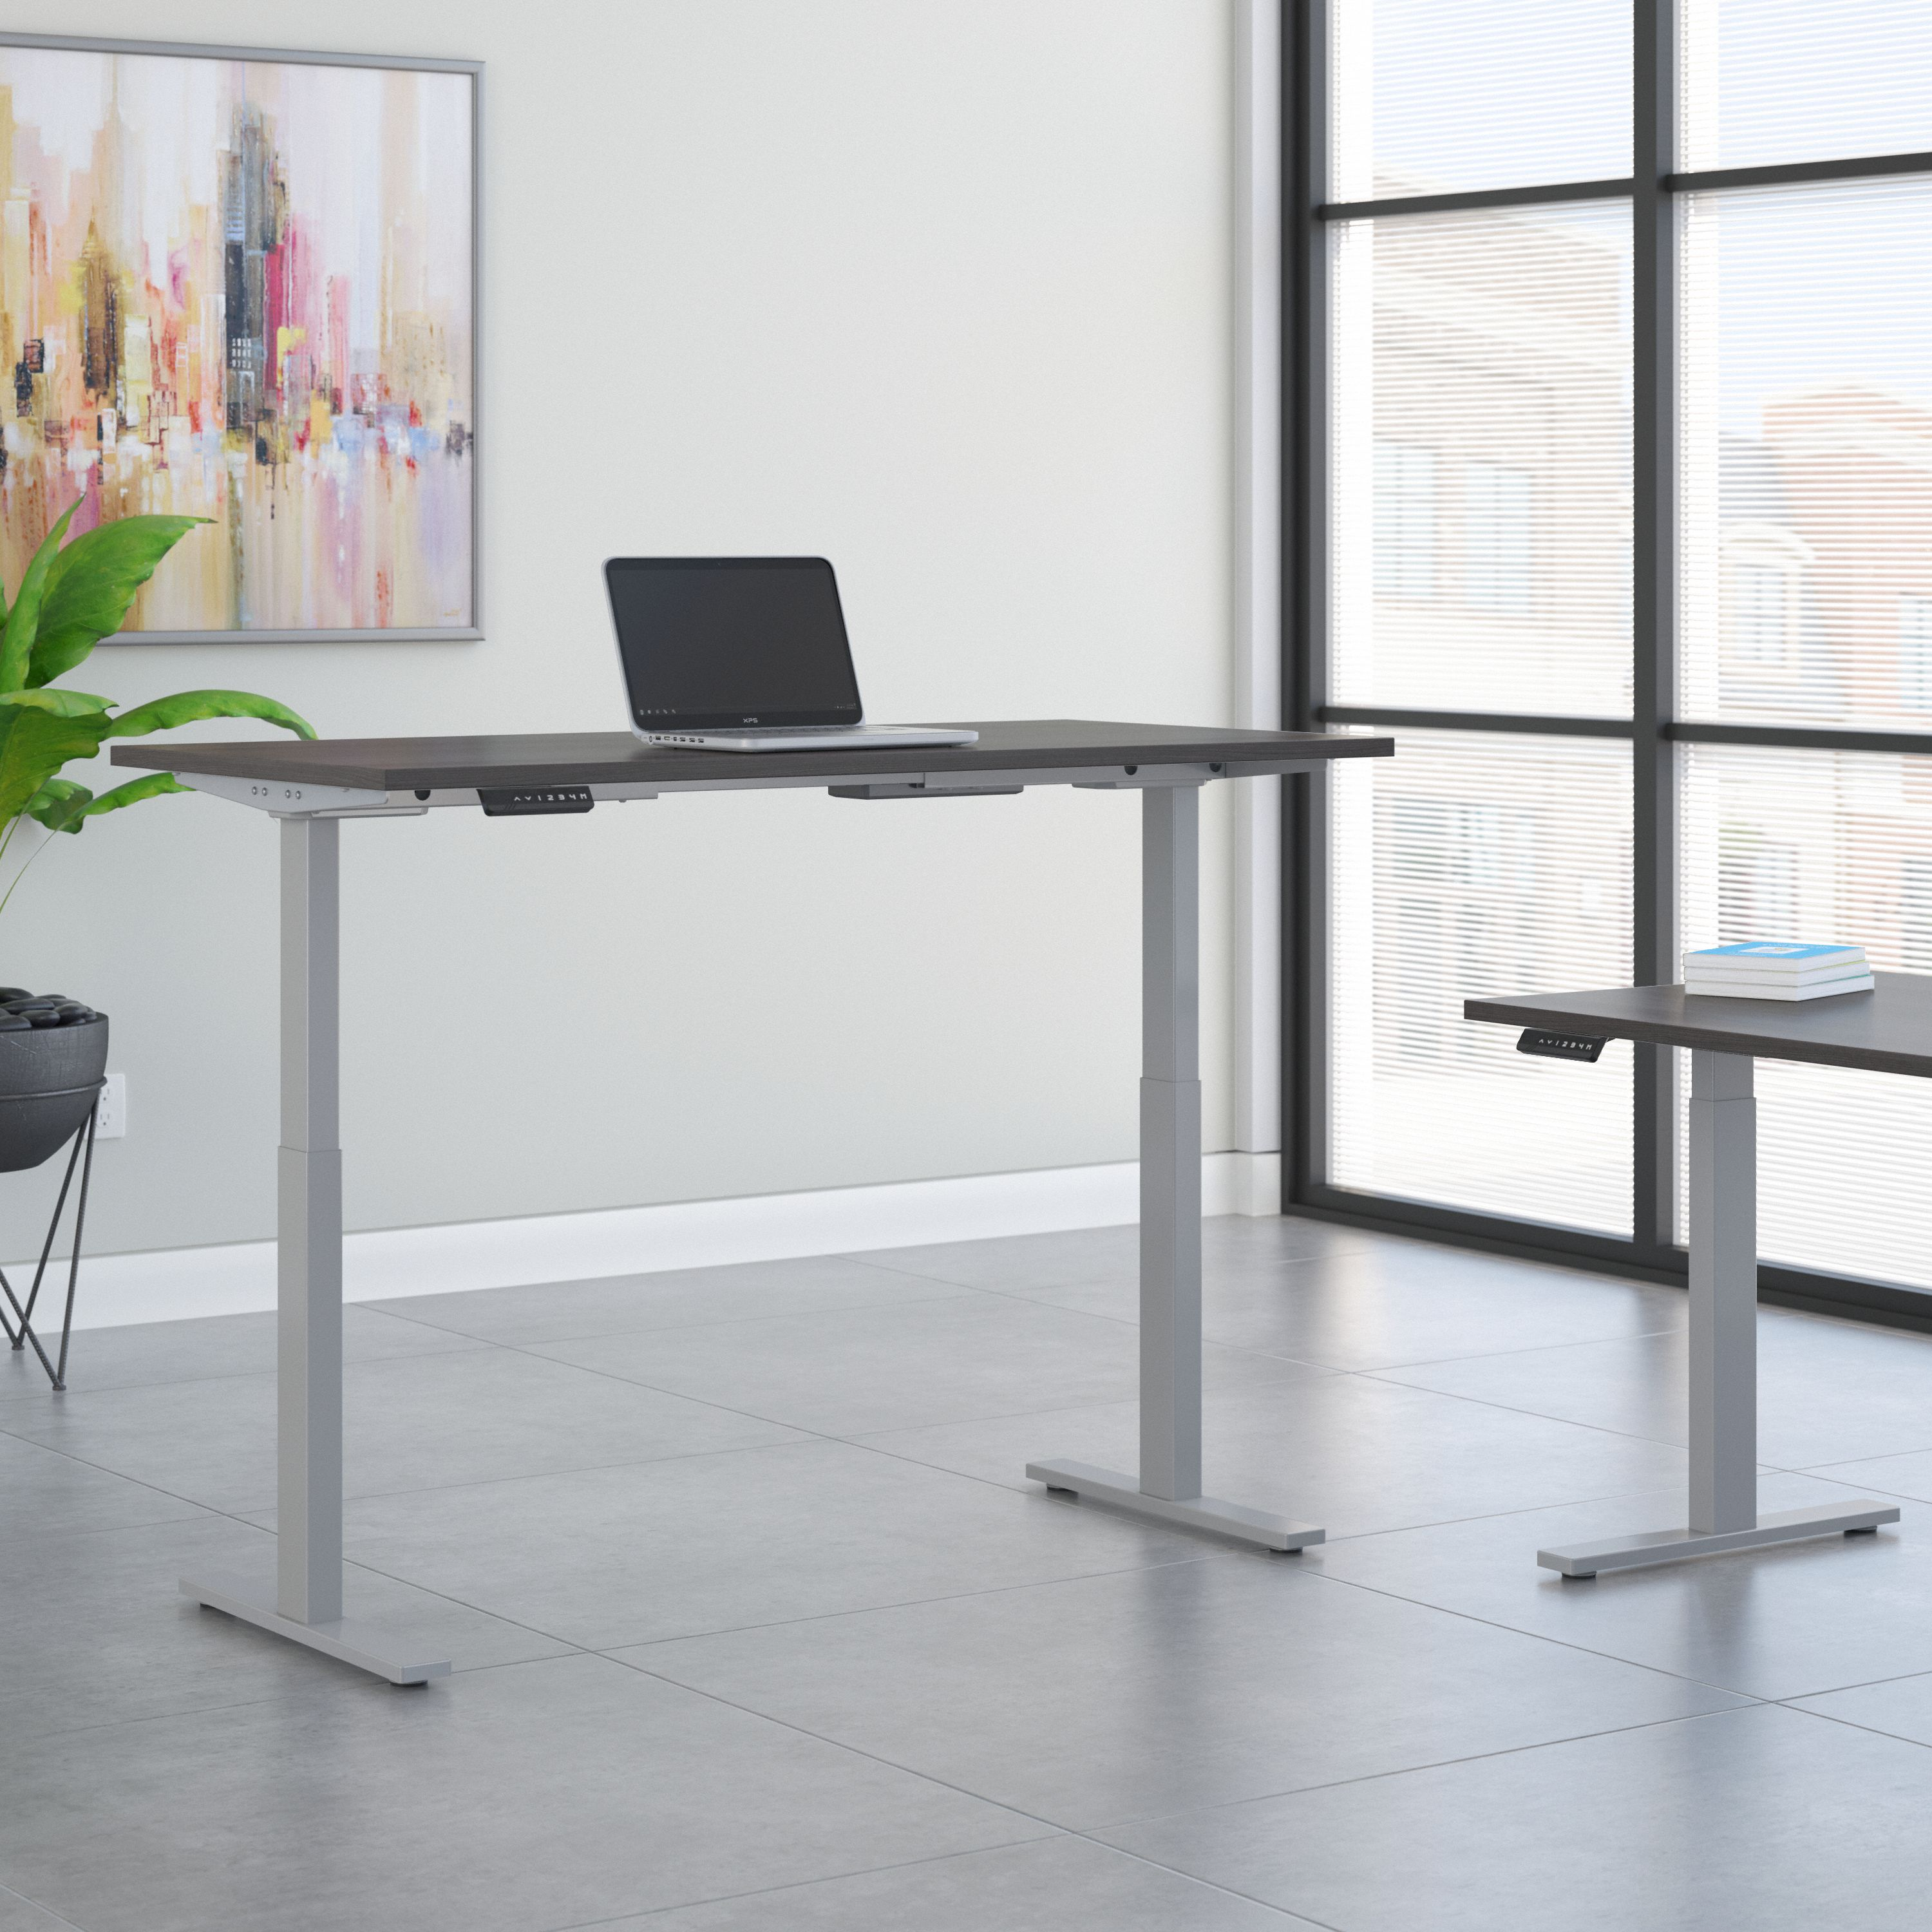 Shop Move 60 Series by Bush Business Furniture 72W x 30D Height Adjustable Standing Desk 01 M6S7230SGSK #color_storm gray/cool gray metallic